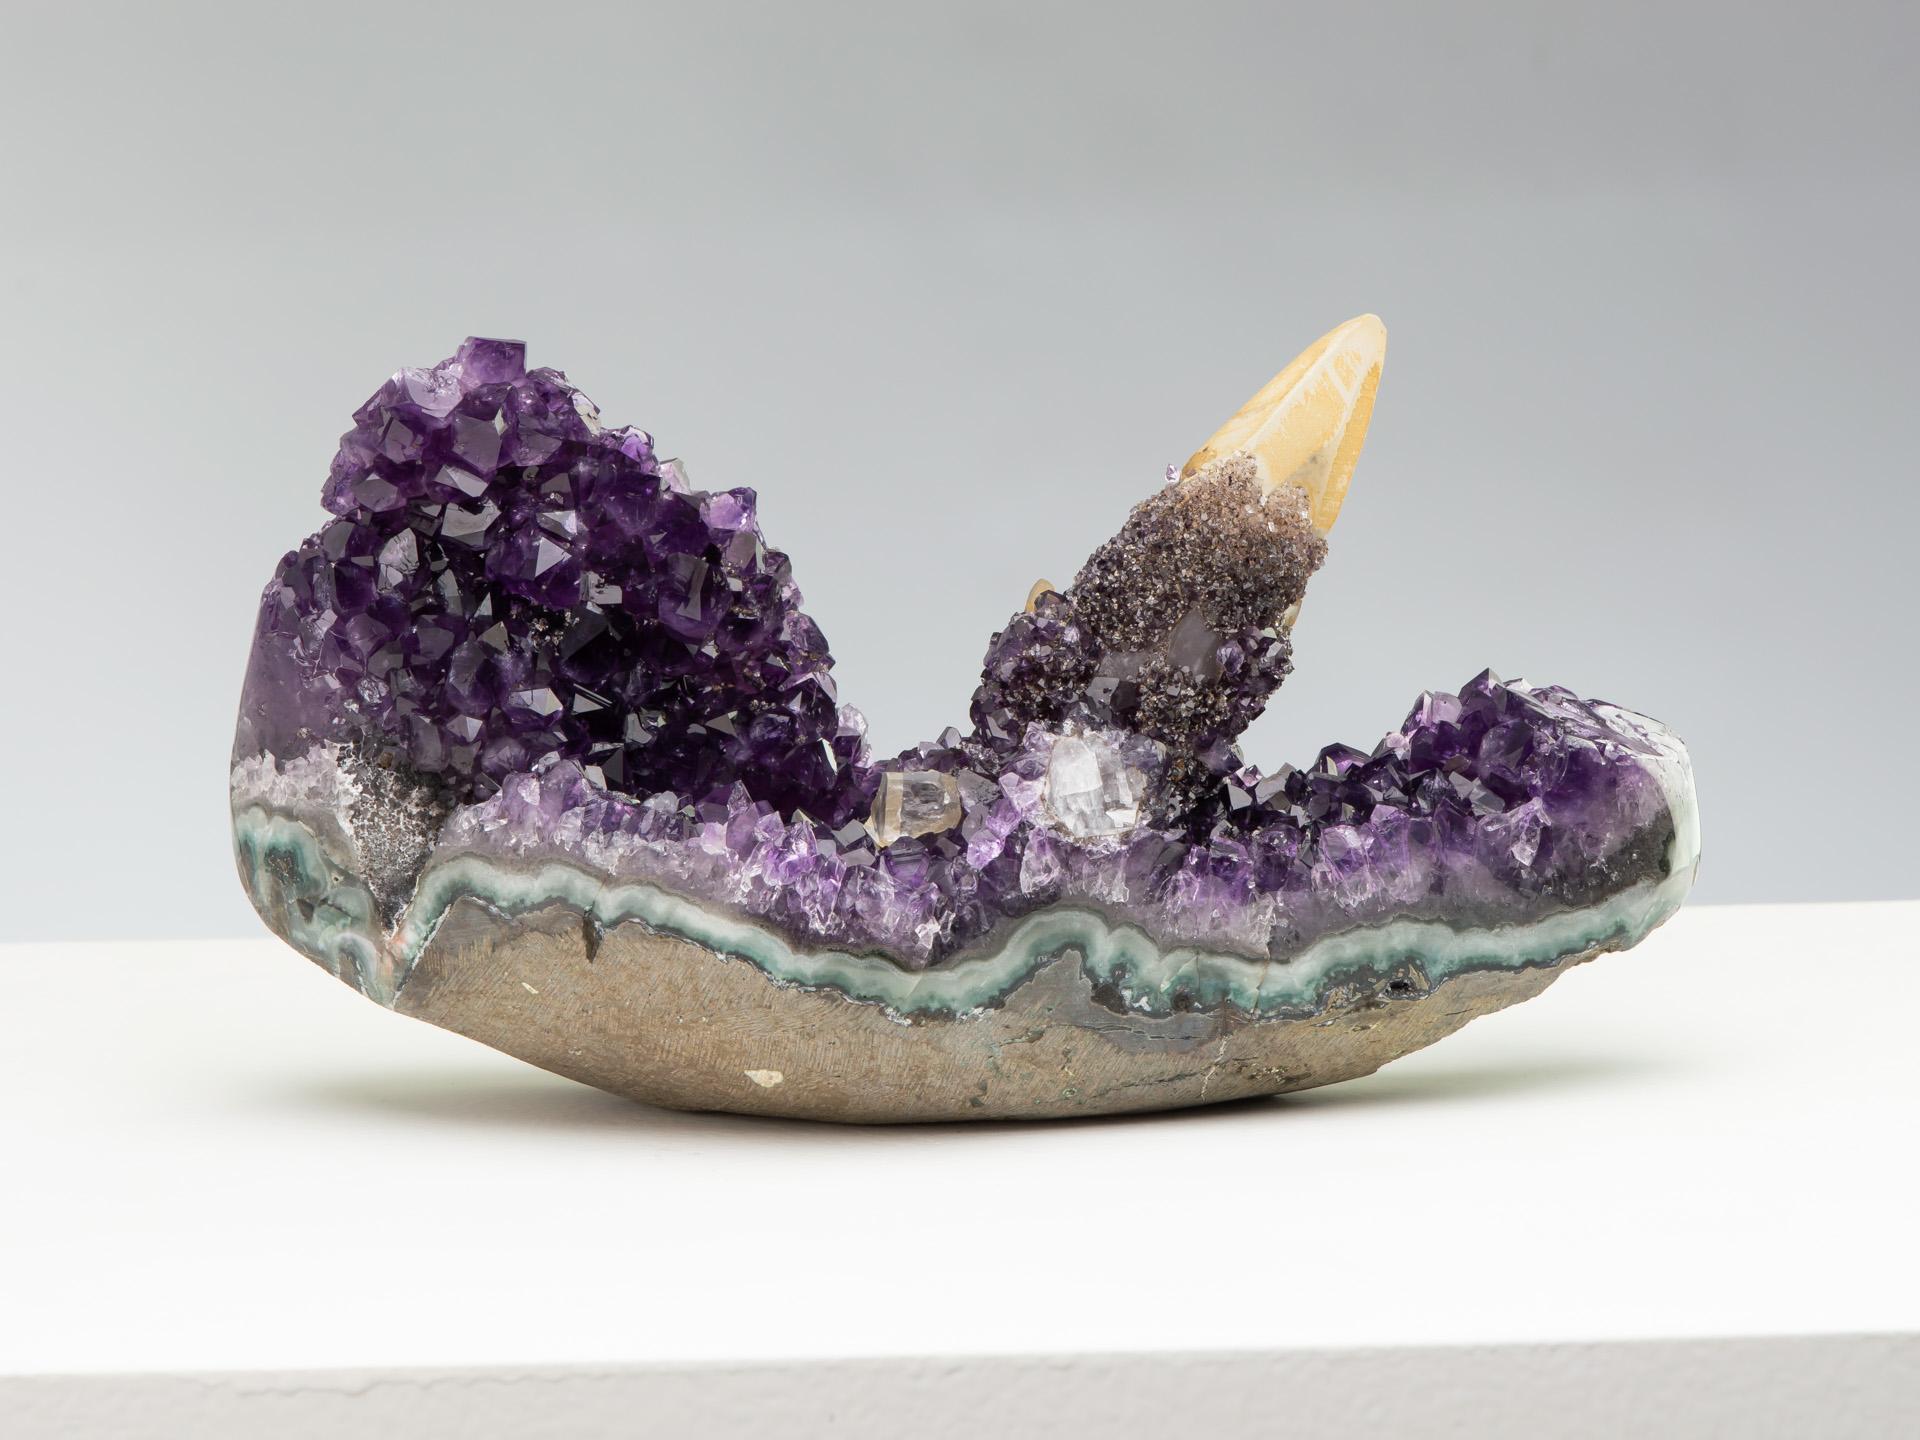 A very rare and exquisite table-top amethyst formation. The long fromation preserves a prominent golden calcite crystal on a bed of deep purple amethyst and is particularly sculptural. The calcite is itself covered in rare goethite and white quartz,